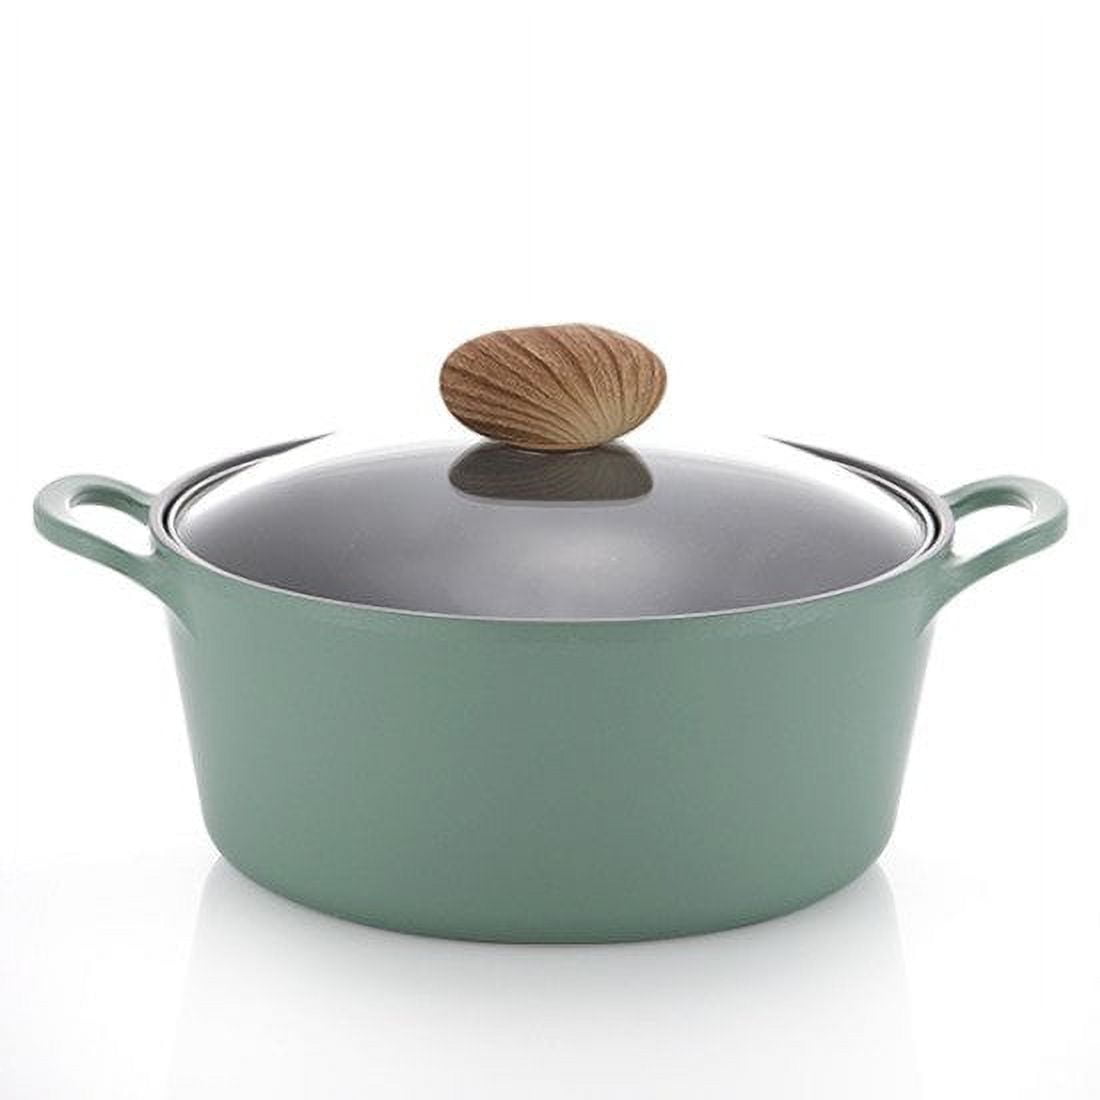 Neoflam Retro Green Demer Cookware Pot Set | Die-Cast, Various Cooktop |  Made in Korea (Set)